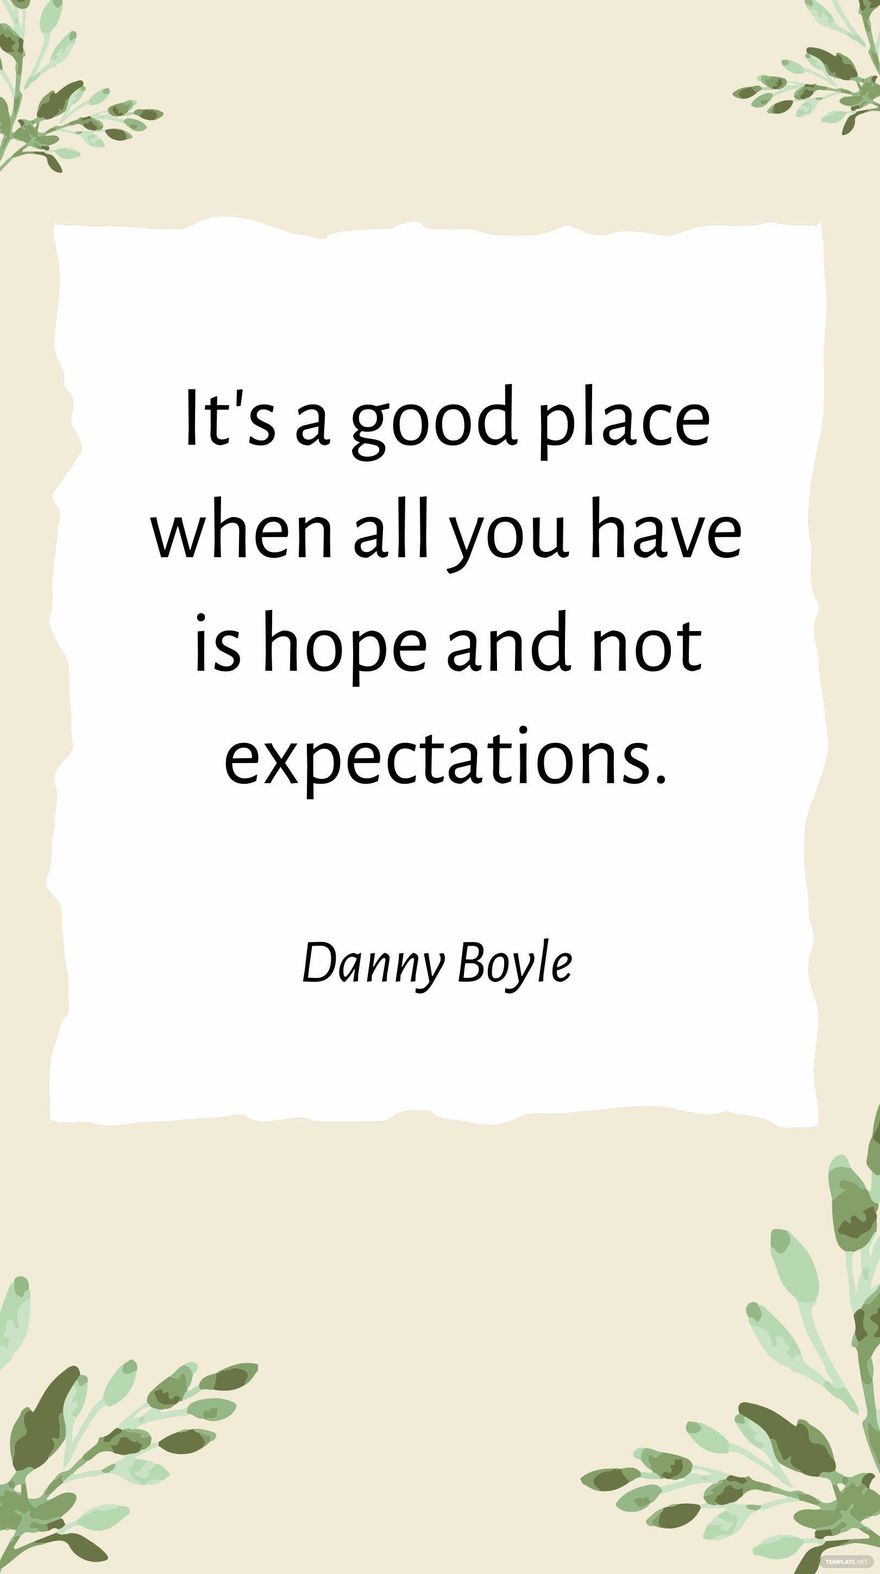 Free Danny Boyle - It's a good place when all you have is hope and not expectations.